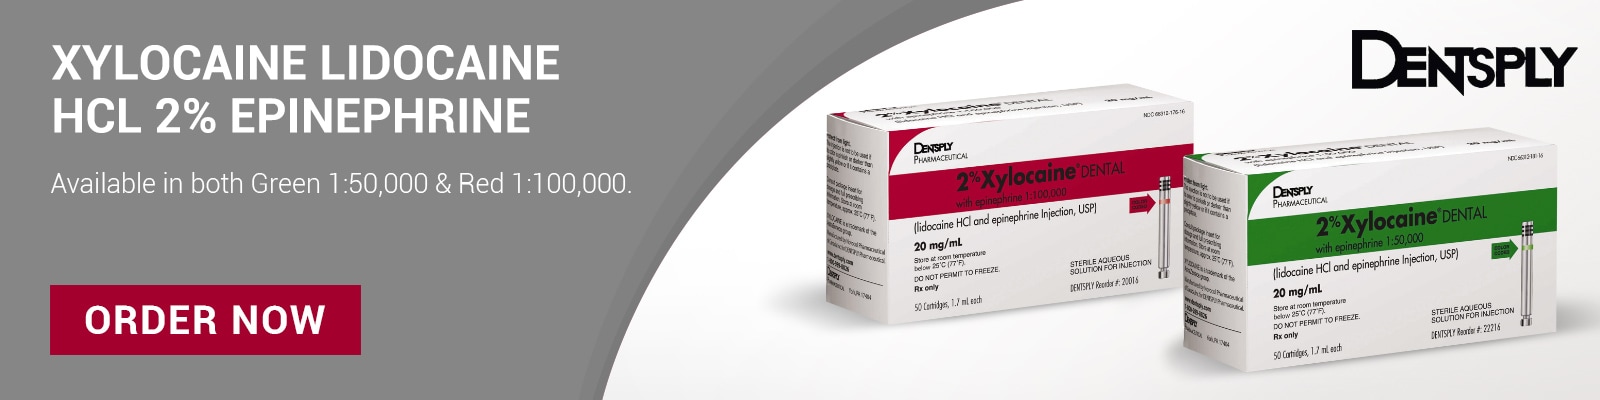 Dentsply Pharmaceutical Xylocaine Lidocaine HCl 2% Epinephrine Green 1:50,000 and Red 1:100,000